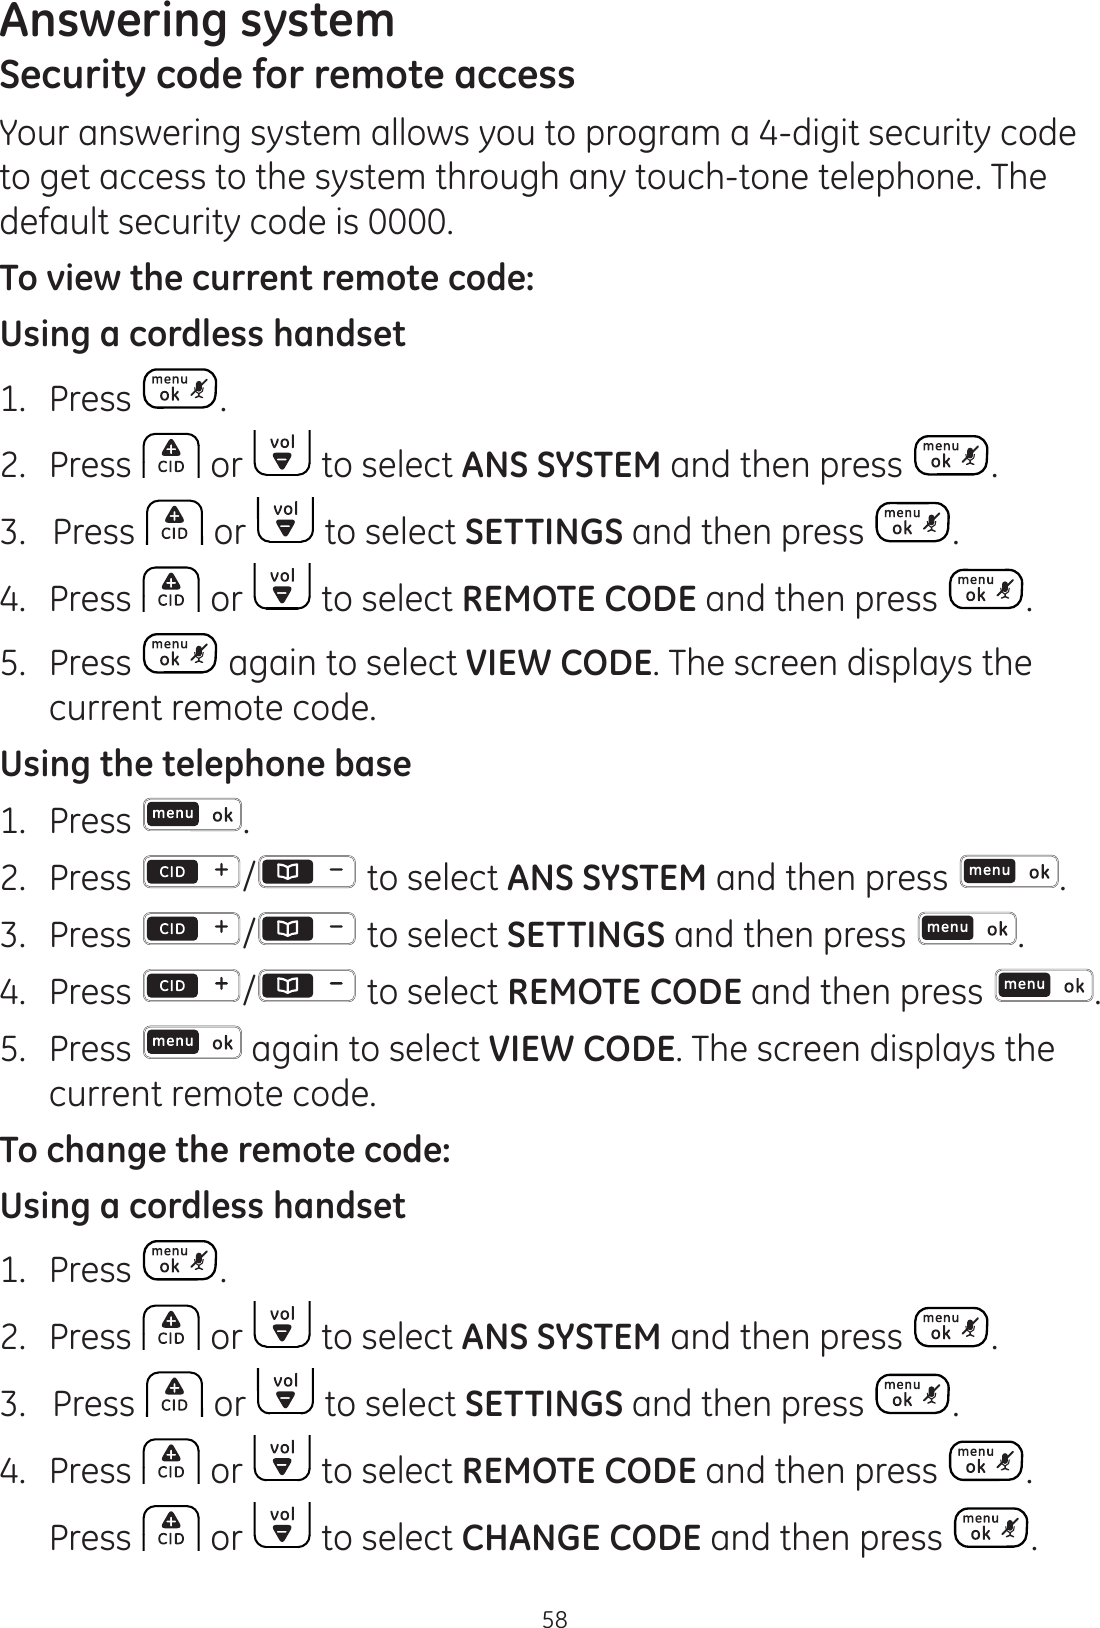 Answering system58Security code for remote accessYour answering system allows you to program a 4-digit security code to get access to the system through any touch-tone telephone. The default security code is 0000.To view the current remote code:Using a cordless handset1.  Press .2.  Press   or   to select ANS SYSTEM and then press  . 3.   Press   or   to select SETTINGS and then press  . 4.   Press   or   to select REMOTE CODE and then press  . 5.   Press   again to select VIEW CODE. The screen displays the current remote code. Using the telephone base1.  Press  .2.  Press  /  to select ANS SYSTEM and then press  . 3.  Press  /  to select SETTINGS and then press  . 4.   Press  /  to select REMOTE CODE and then press  . 5.   Press   again to select VIEW CODE. The screen displays the current remote code. To change the remote code:Using a cordless handset1.  Press  .2.  Press   or   to select ANS SYSTEM and then press  . 3.   Press   or   to select SETTINGS and then press  . 4.   Press   or   to select REMOTE CODE and then press  .  Press   or   to select CHANGE CODE and then press  . 